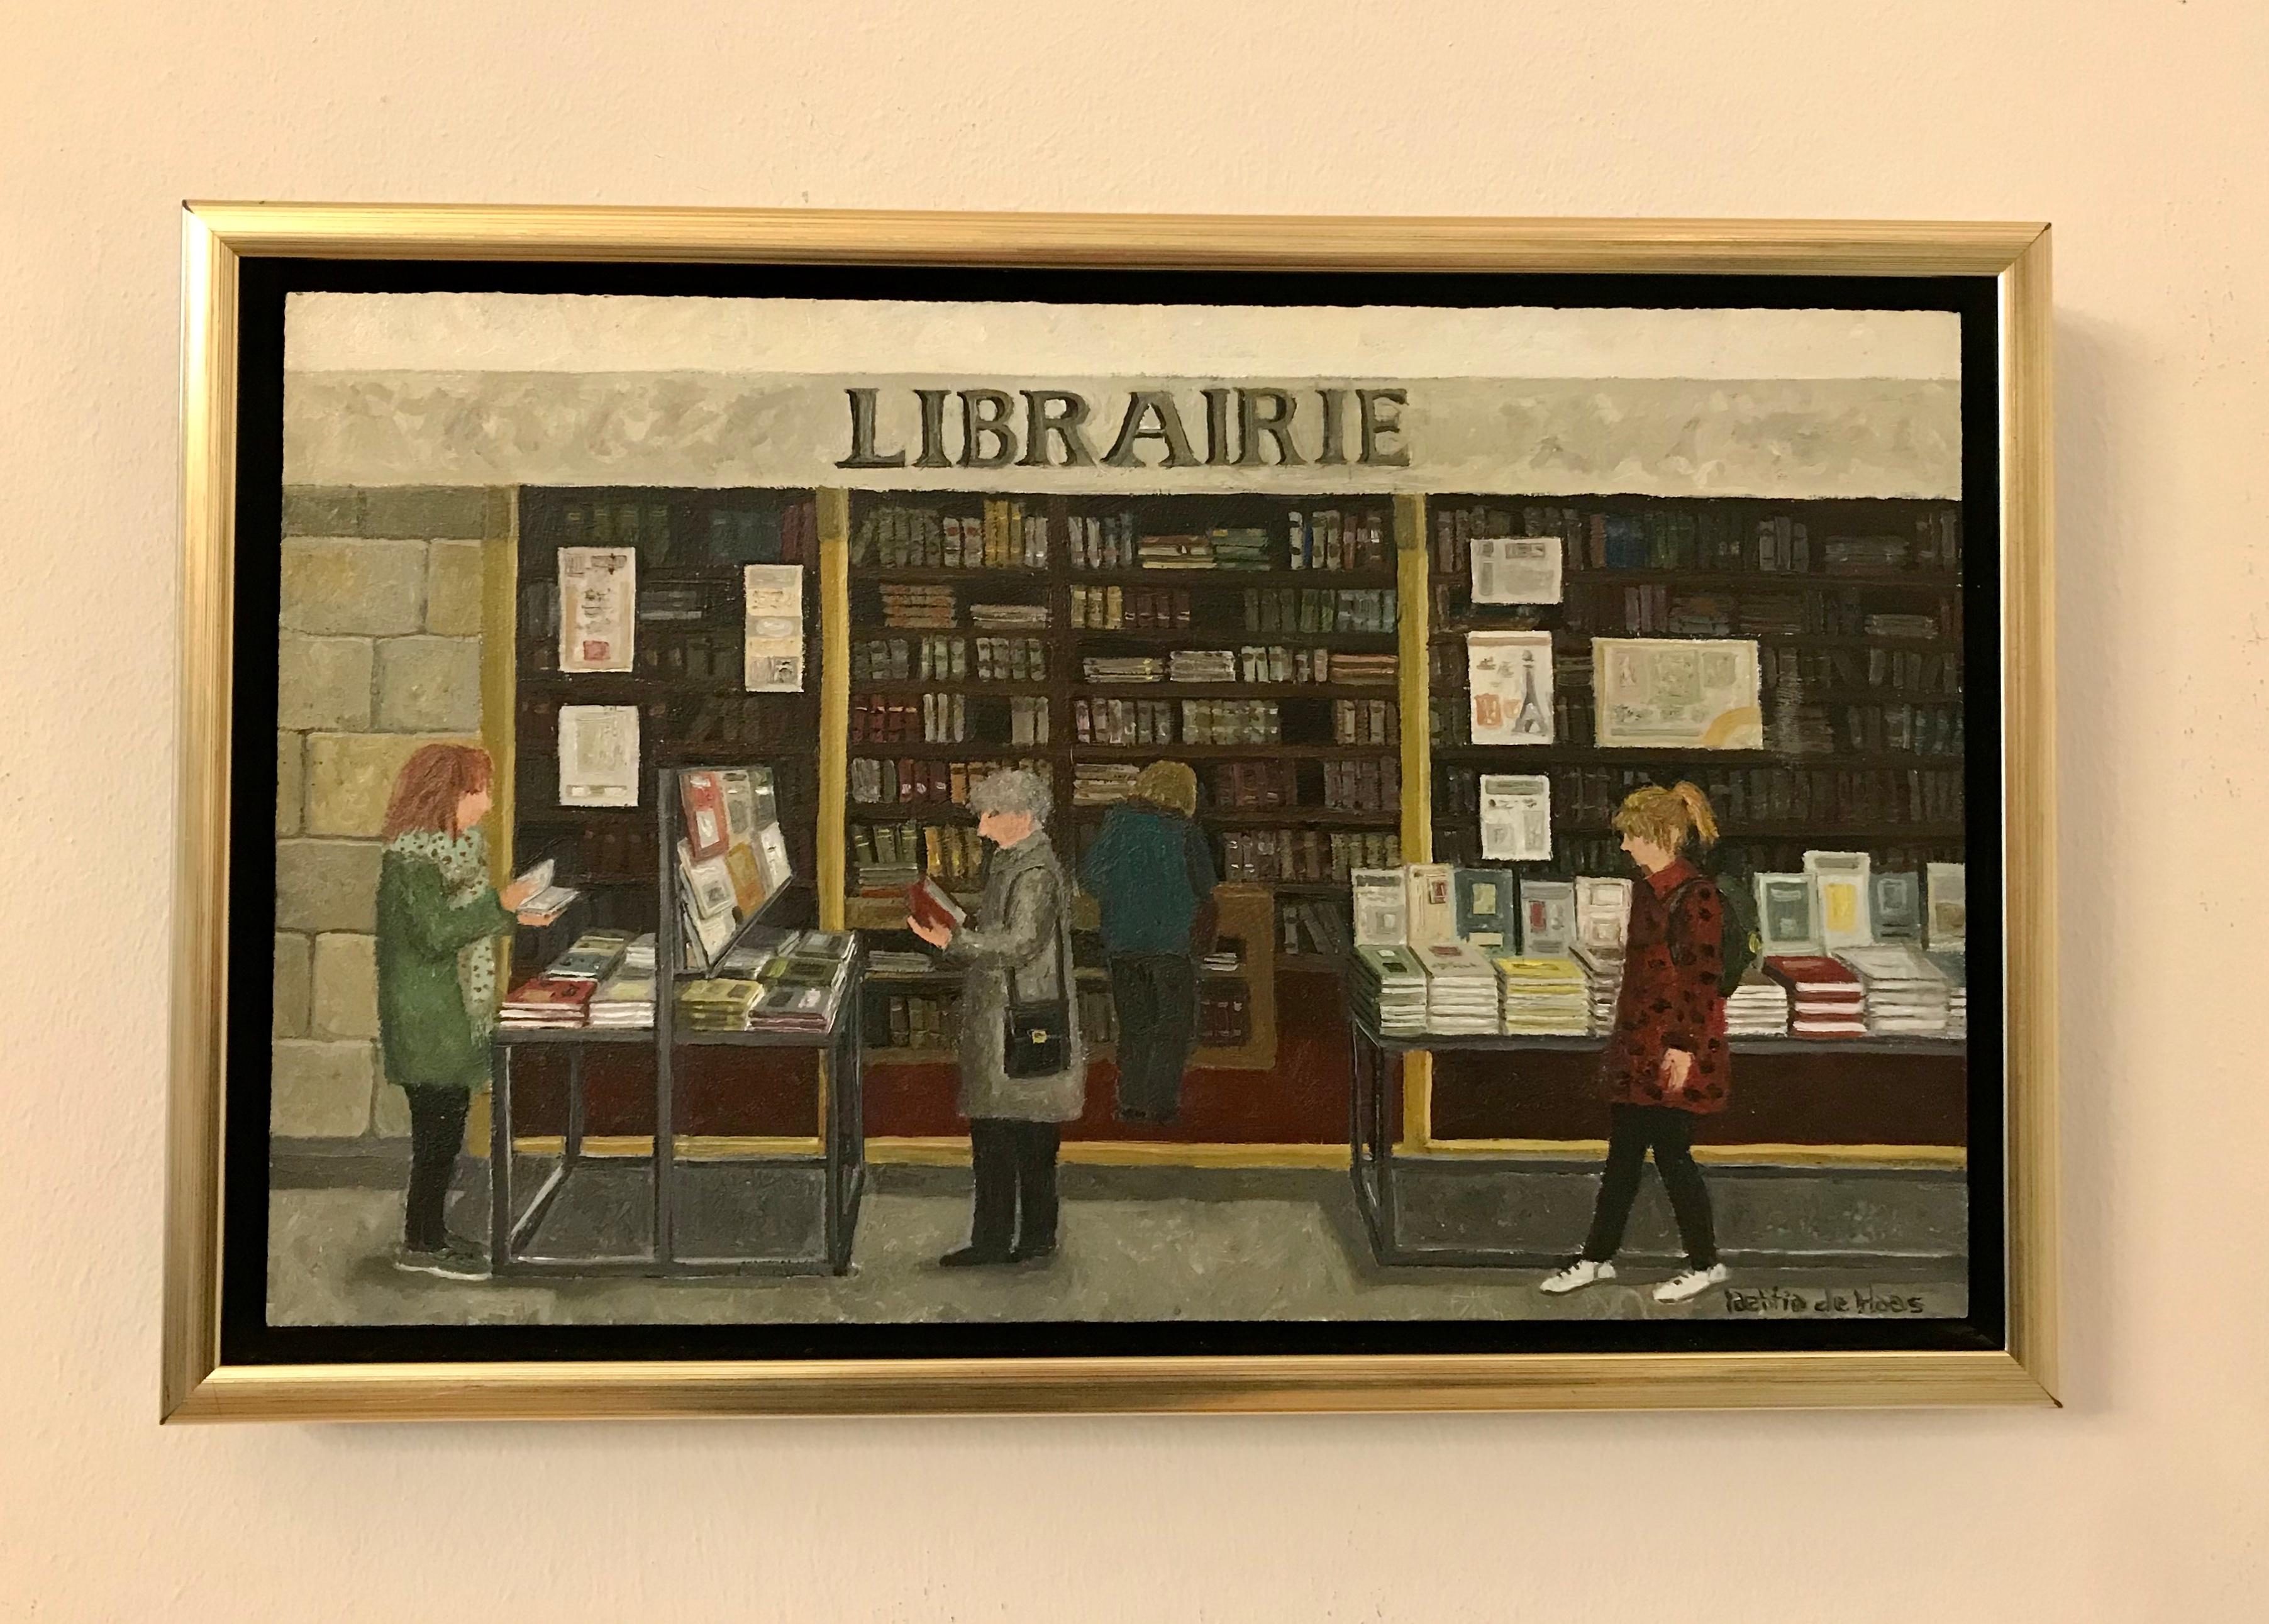 ''Librairie'' Cosy Dutch Painting of a Bookstore - Gray Figurative Painting by Laetitia de Haas